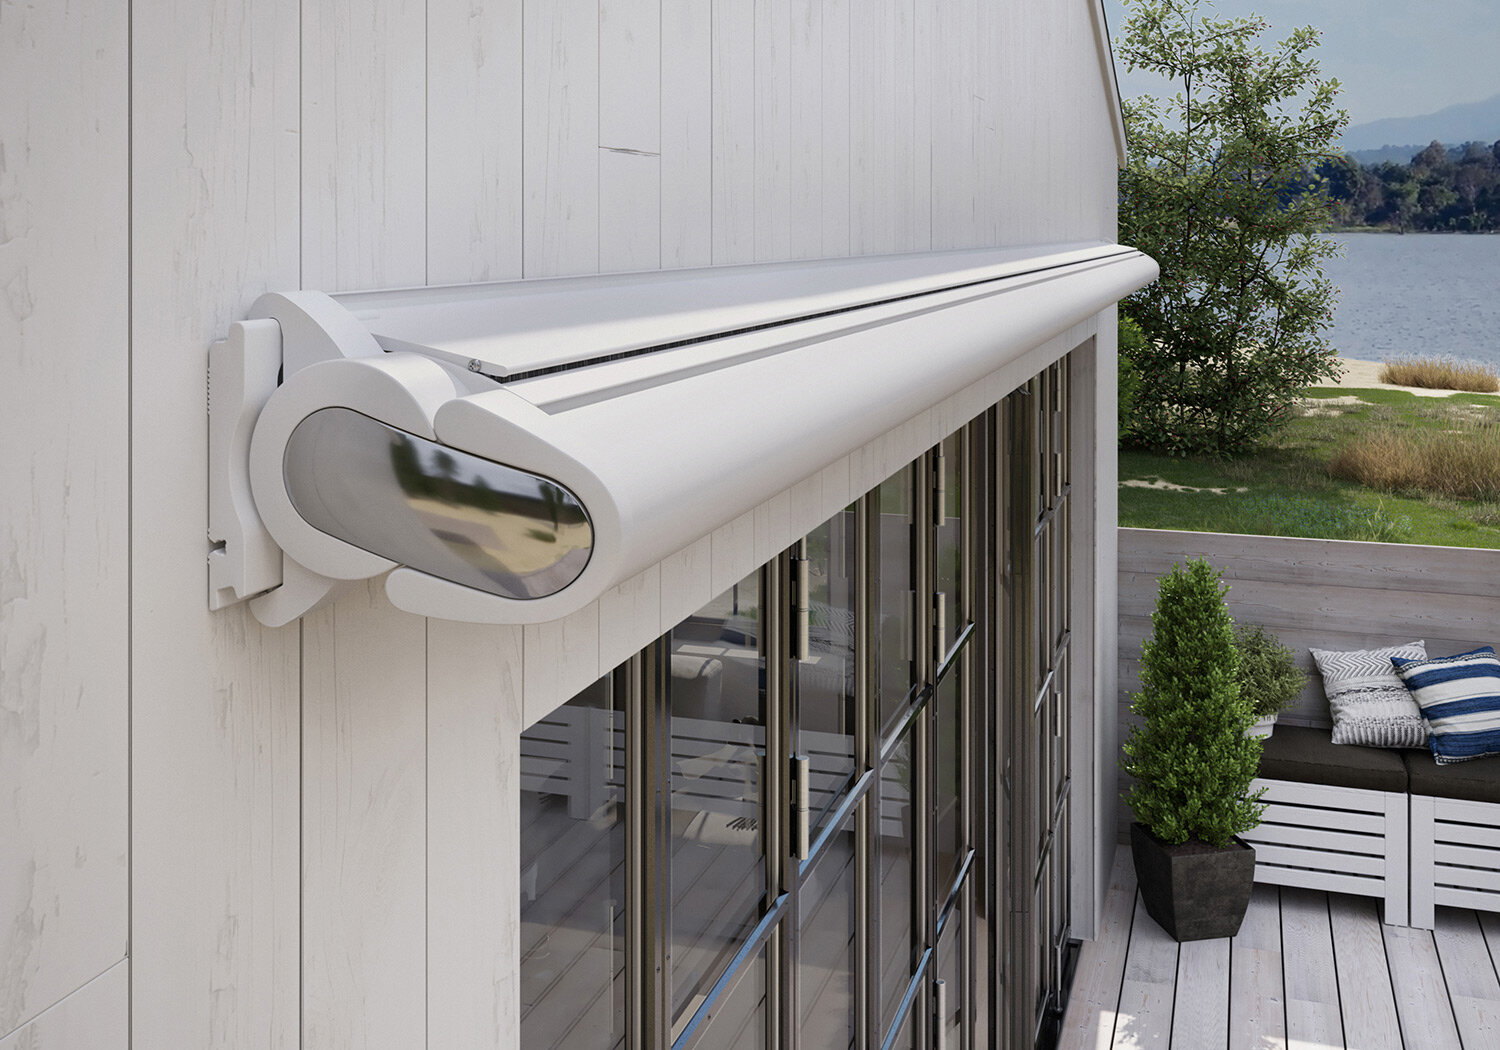 Motorised Awnings Hampshire. We offer motorised awnings across price points from market leading manufacturers such as Markilux, as well as UK manufactured product for a quick turnaround. 